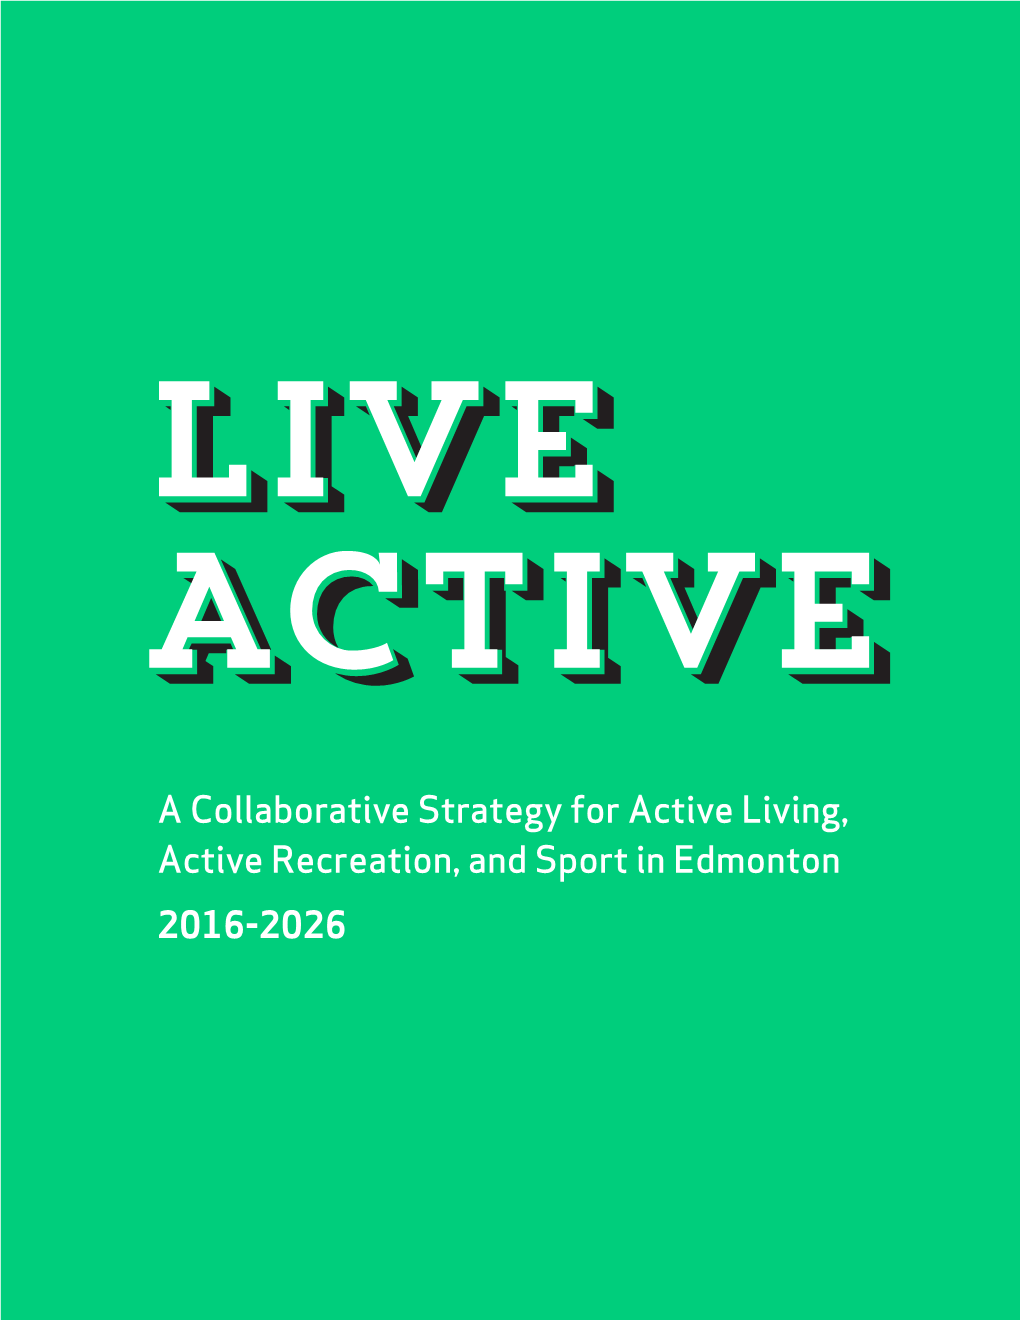 A Collaborative Strategy for Active Living, Active Recreation, and Sport in Edmonton 2016-2026